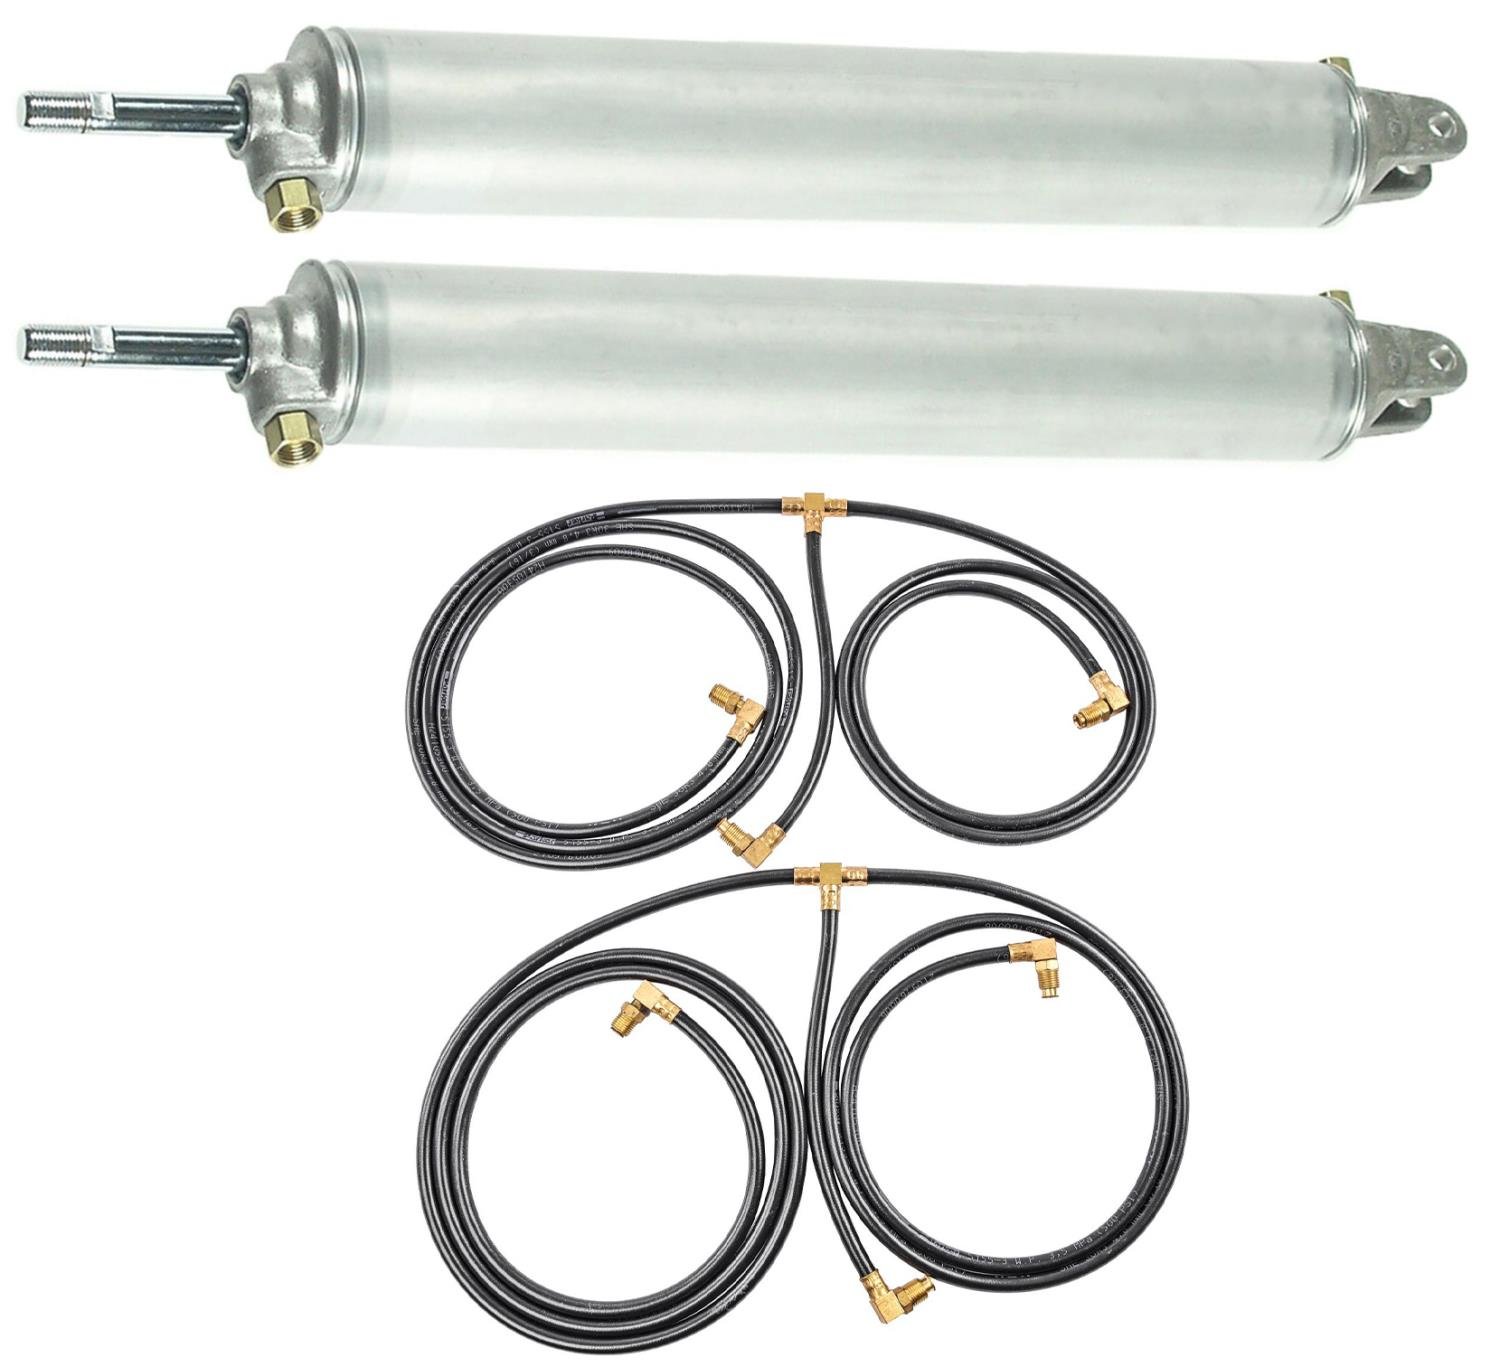 Convertible Top Cylinder & Hose Kit for 1951-1952 GM Full-Size Chevrolet, Pontiac Convertibles [Sold as a Kit]